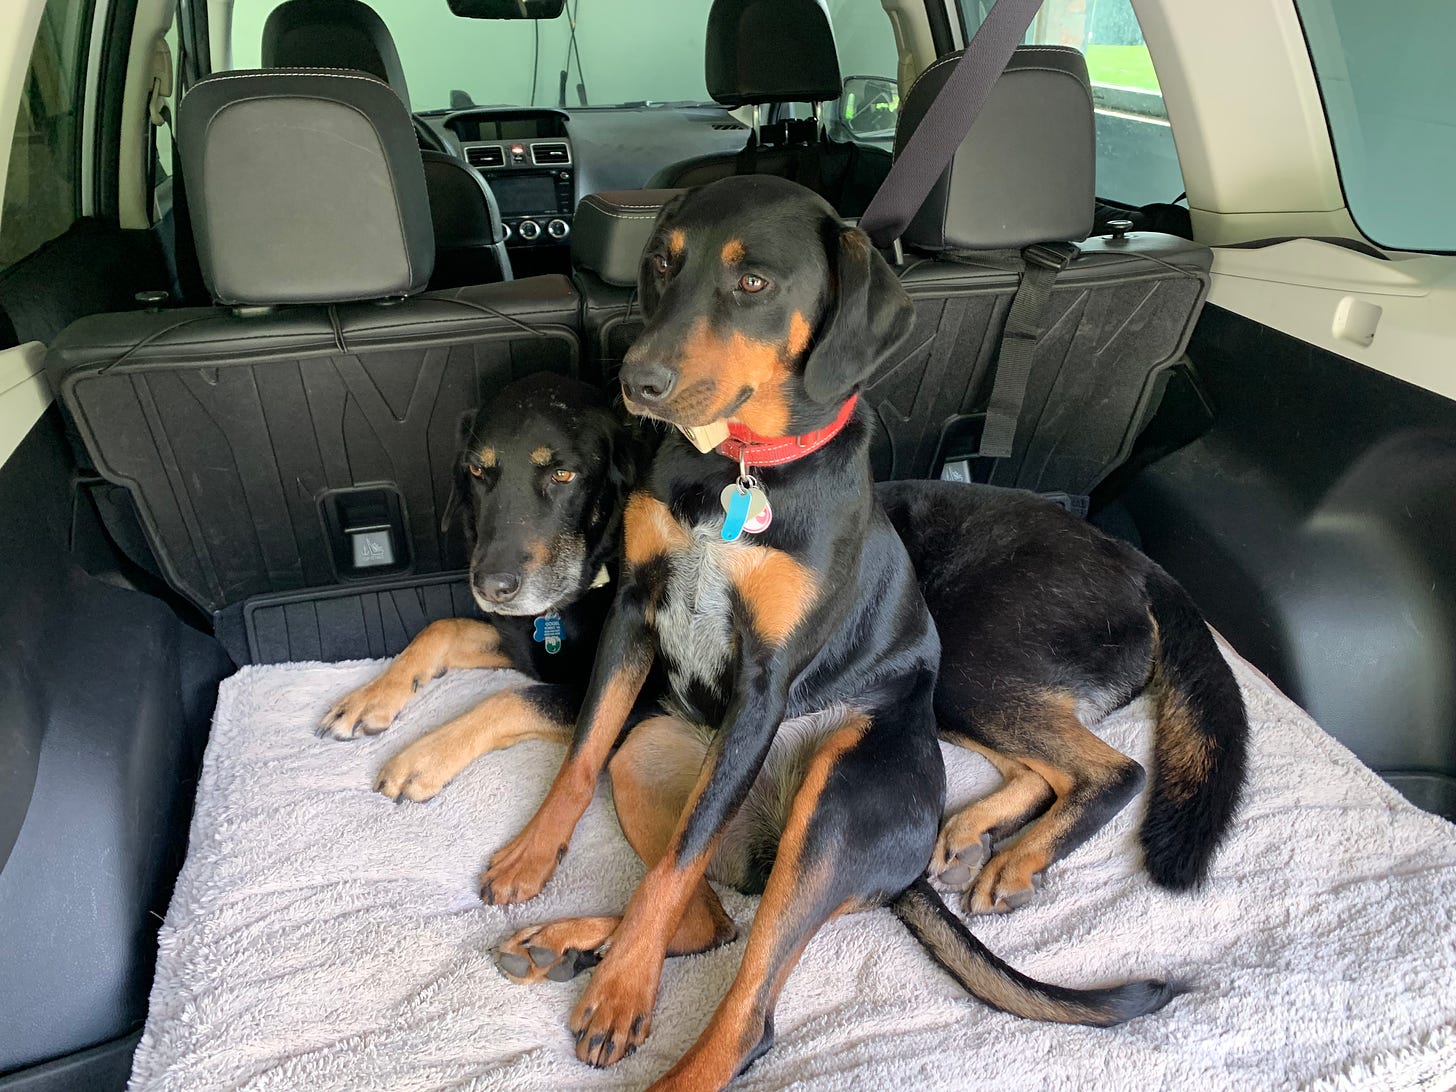 Buddha (back) and Ruby (front) loaded in the car waiting patiently for the adventure to begin